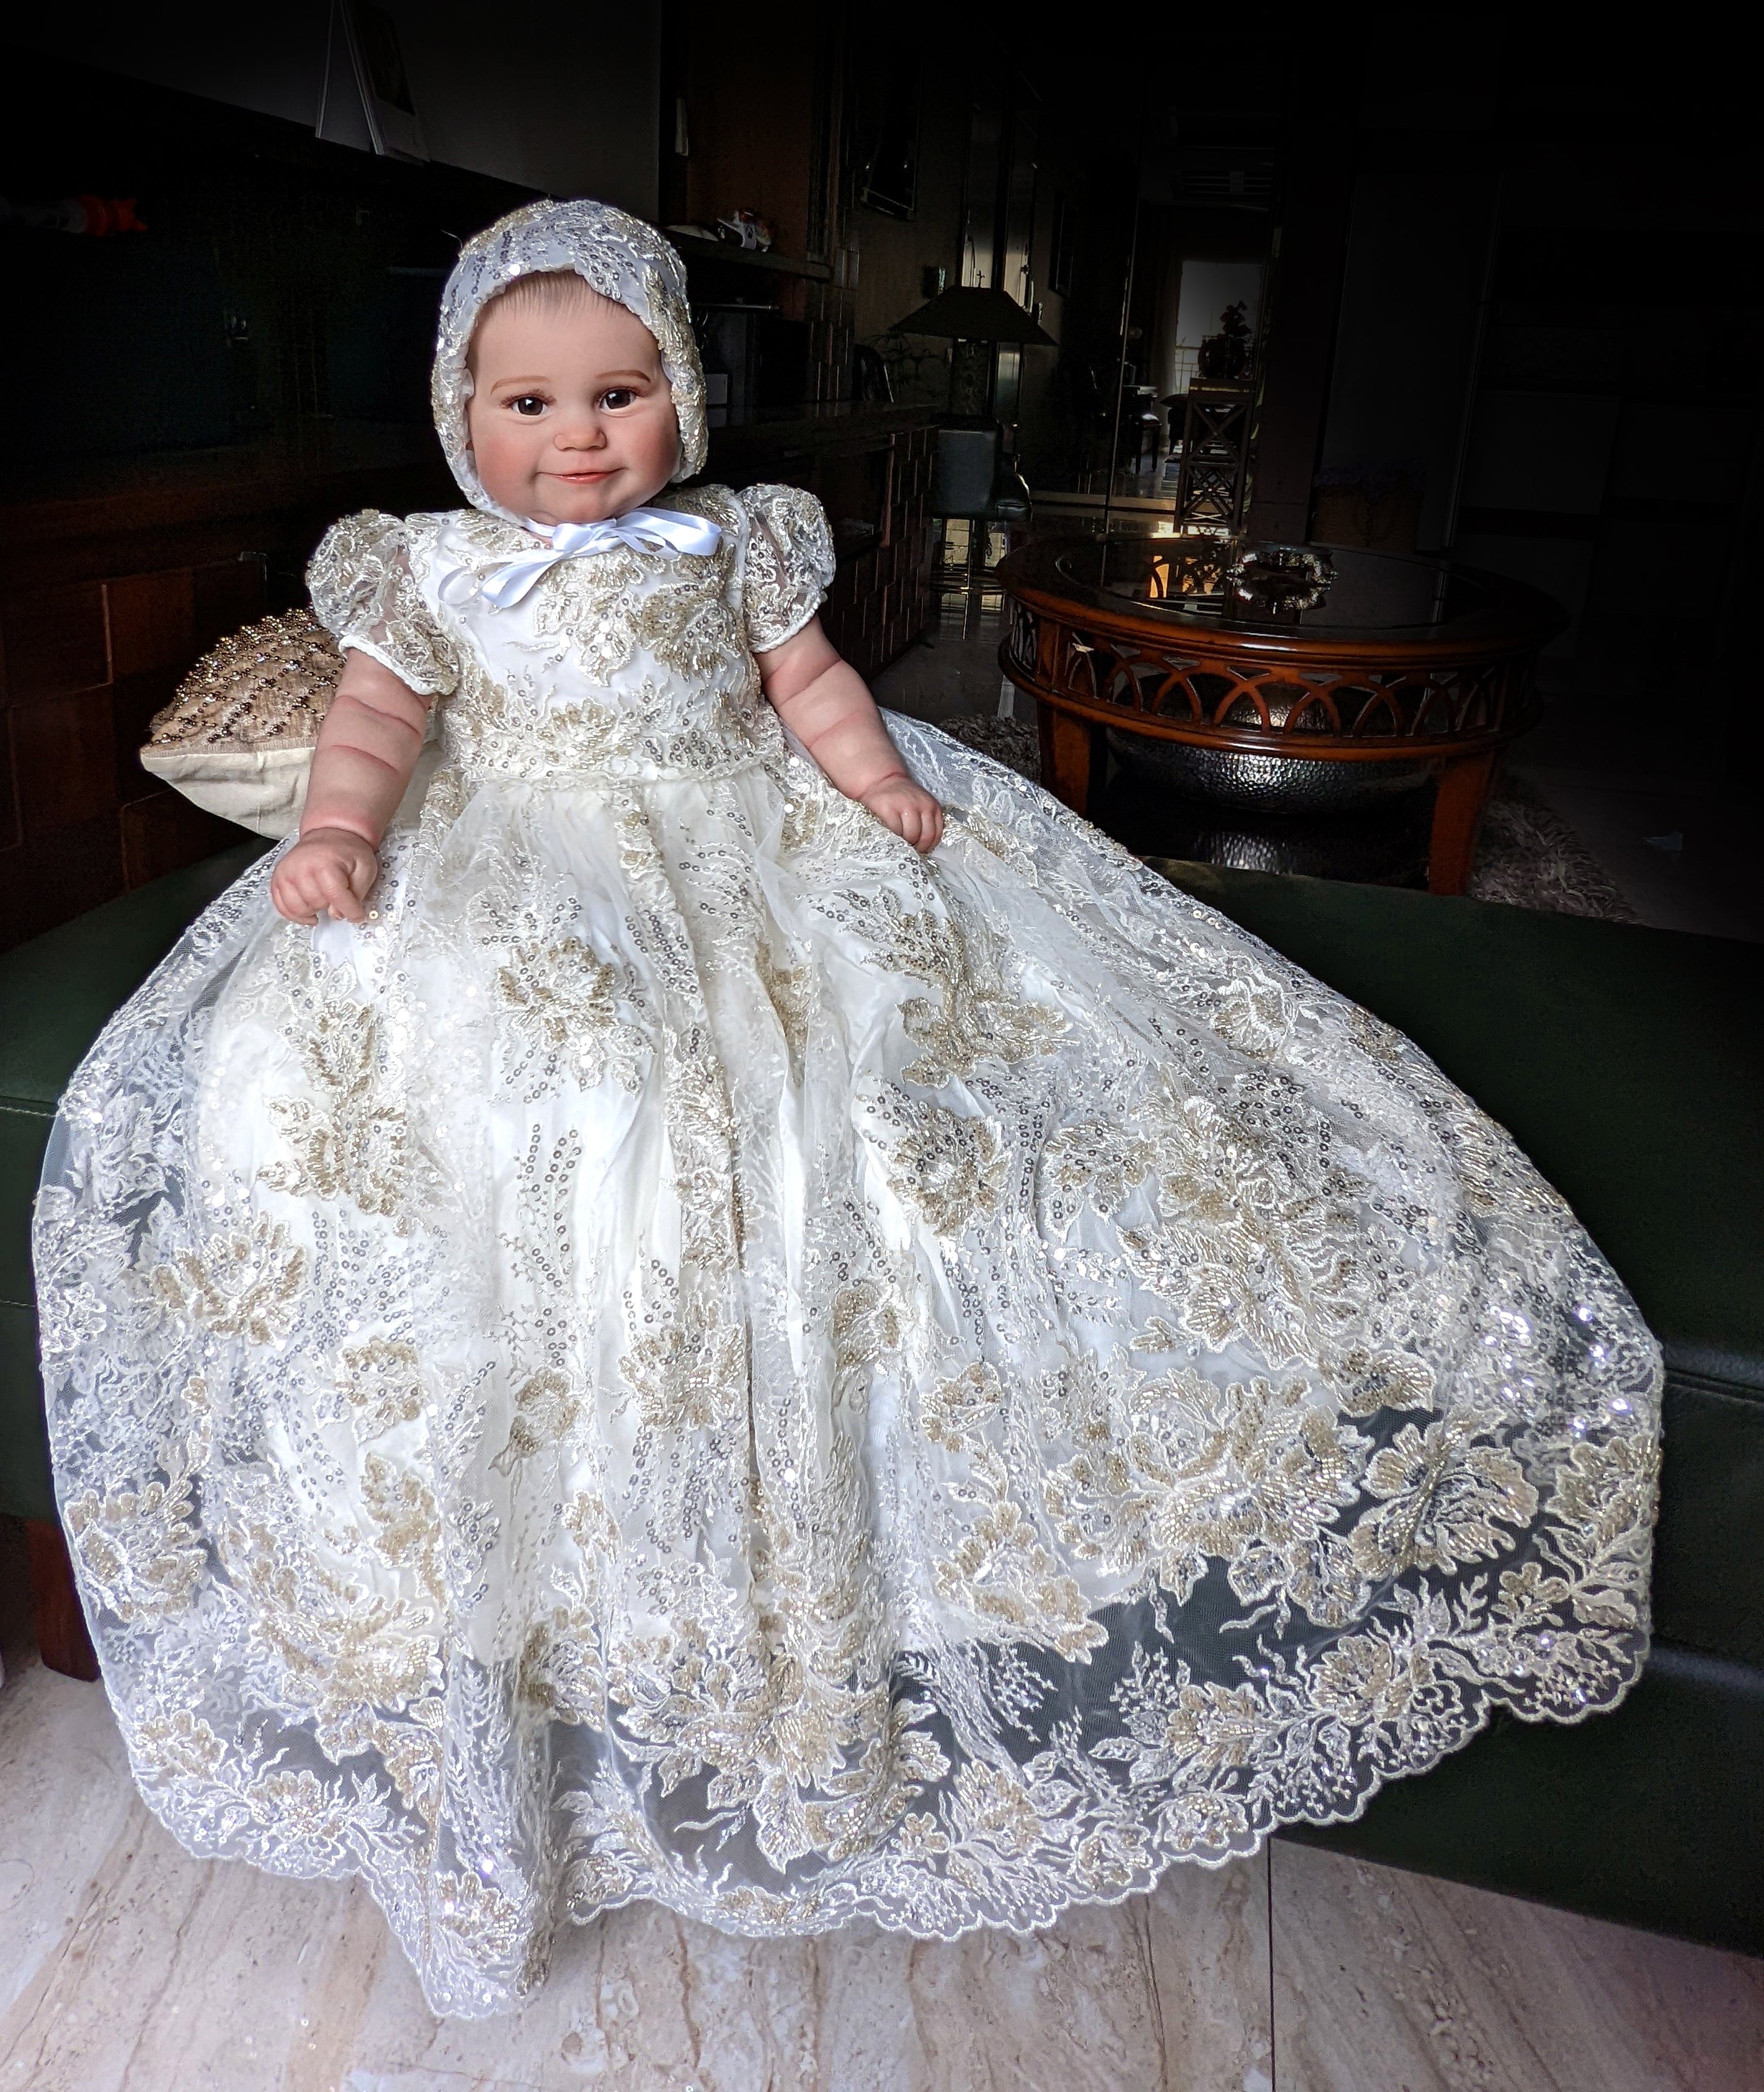 White Lace Baby Baptism Appliques Bling Lolita Robe Dresses Christening Gown  New | eBay